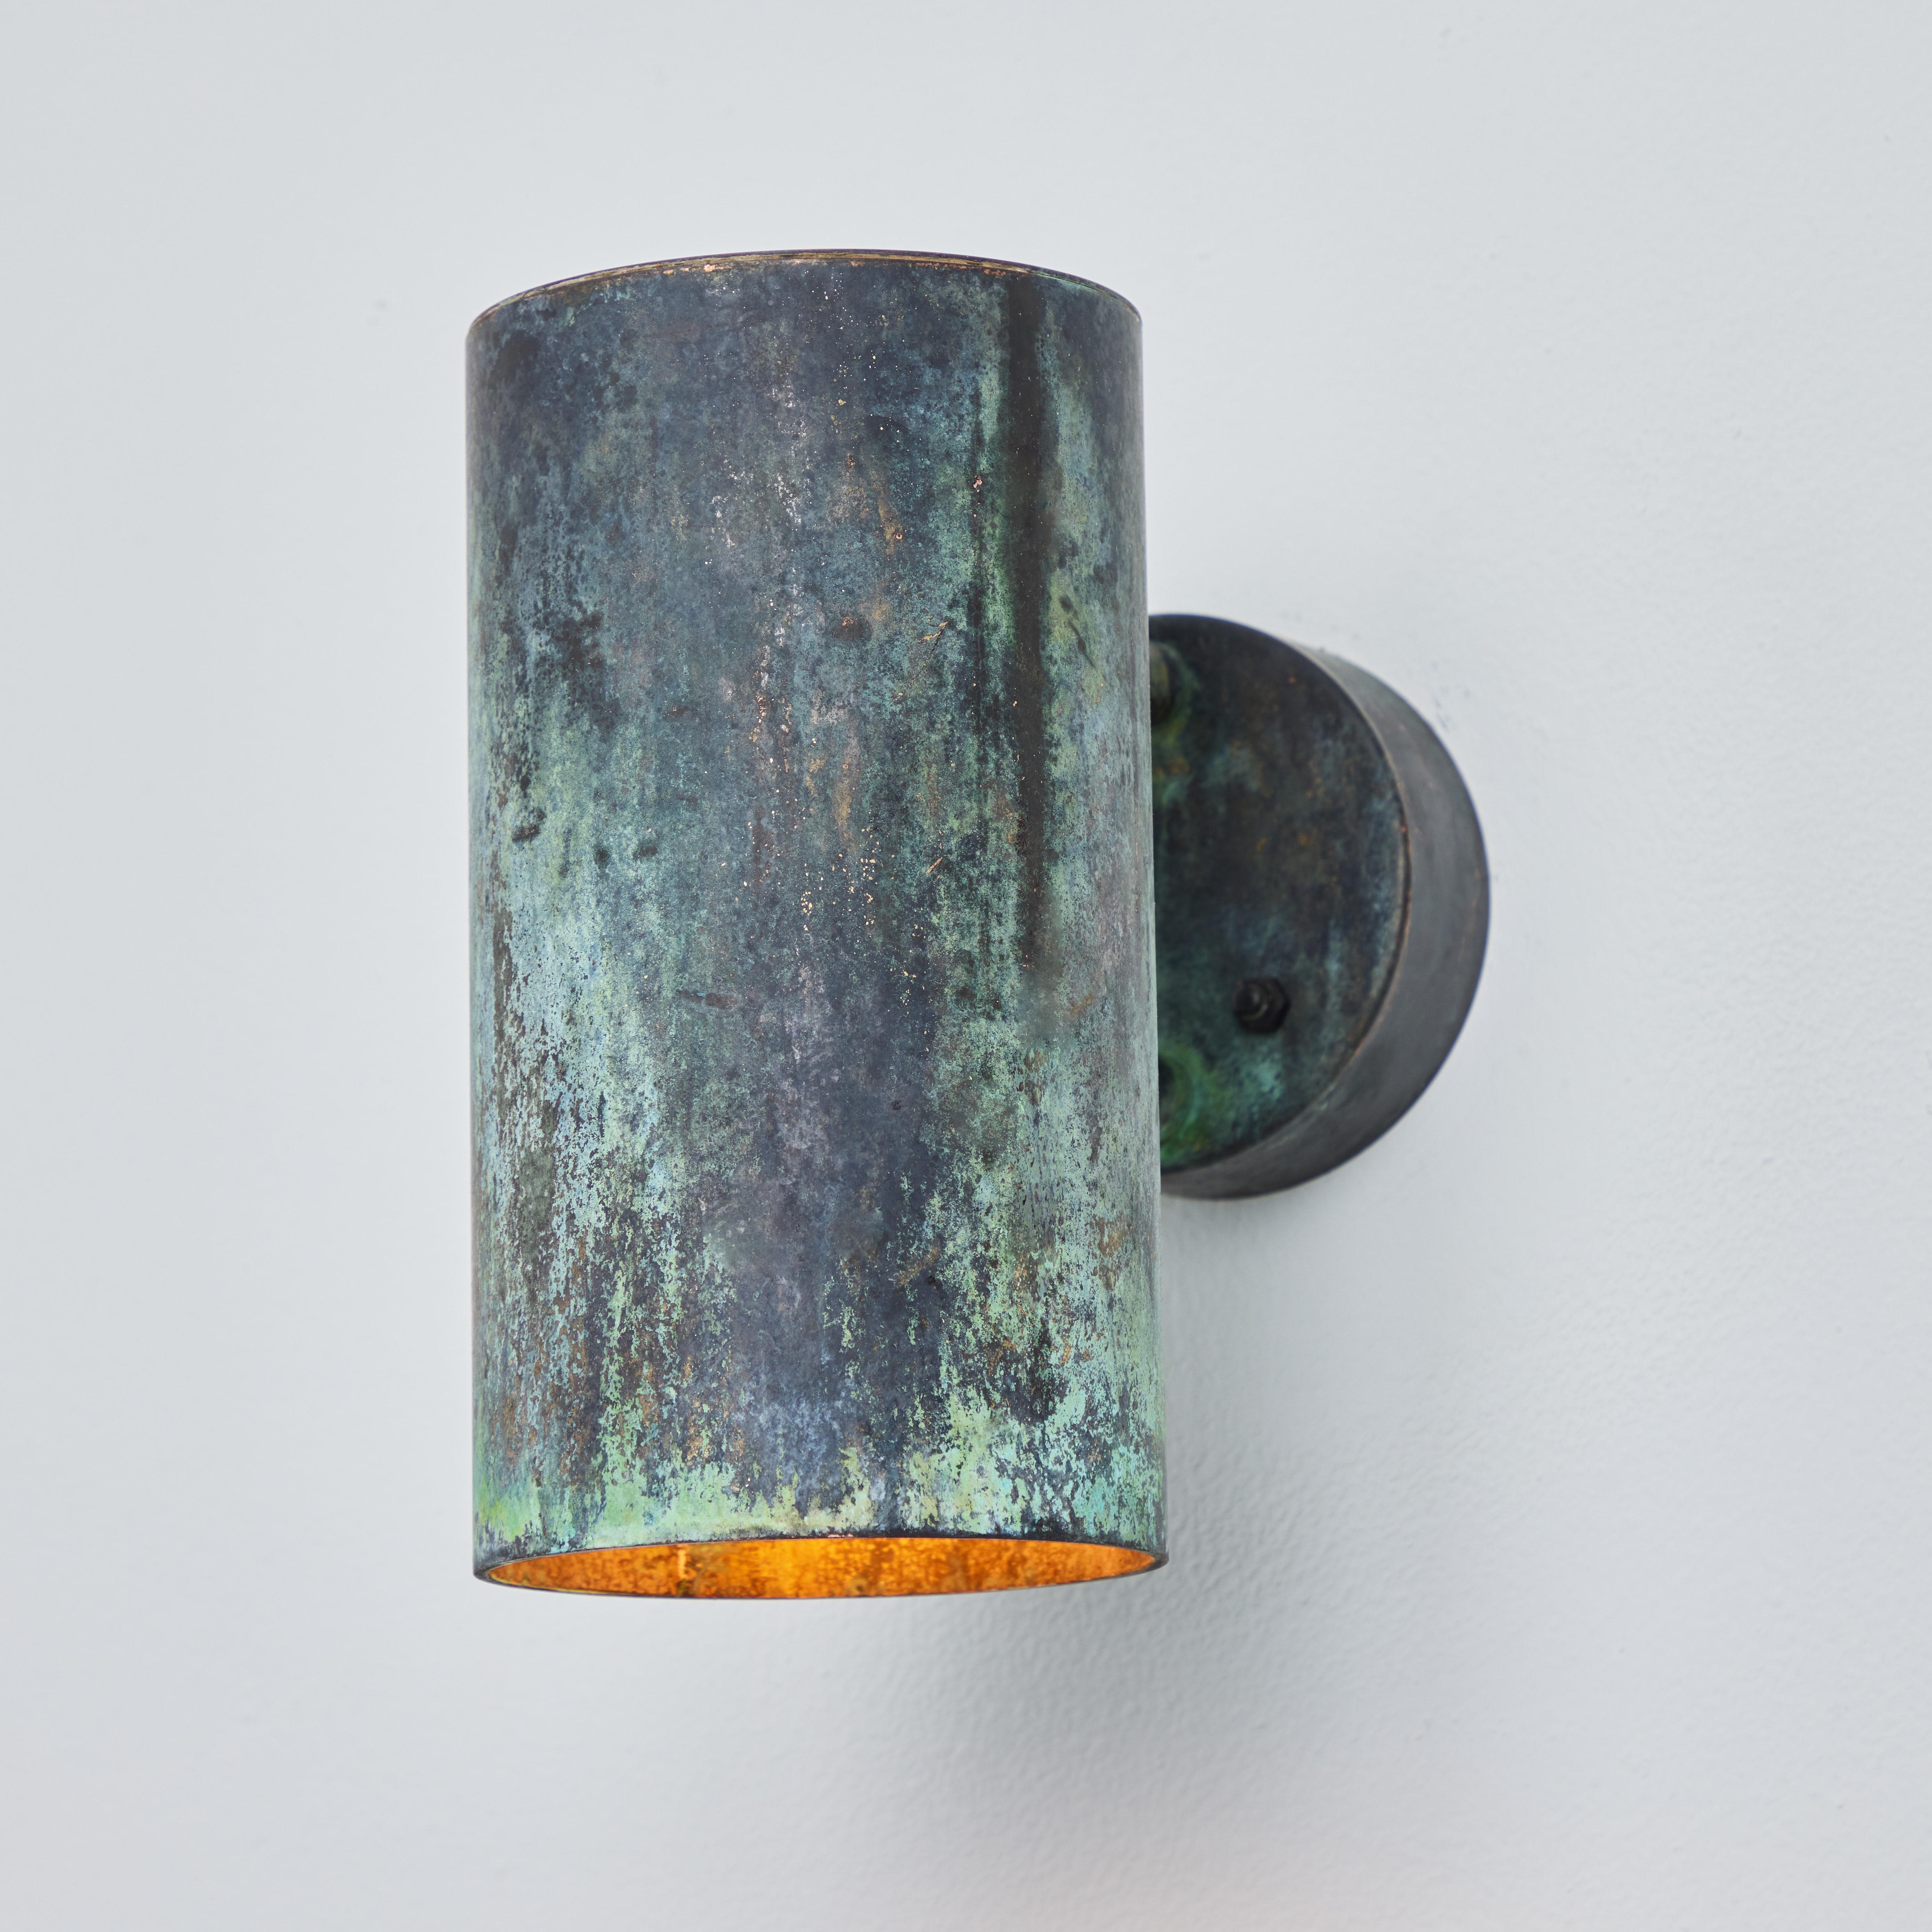 Hans-Agne Jakobsson C 627/110 'Rulle' darkly patinated outdoor sconce. An exclusive made for U.S. and UL listed authorized re-edition of the classic Swedish design executed in darkly patinated metal with raw unlacquered metal interior. An incredibly